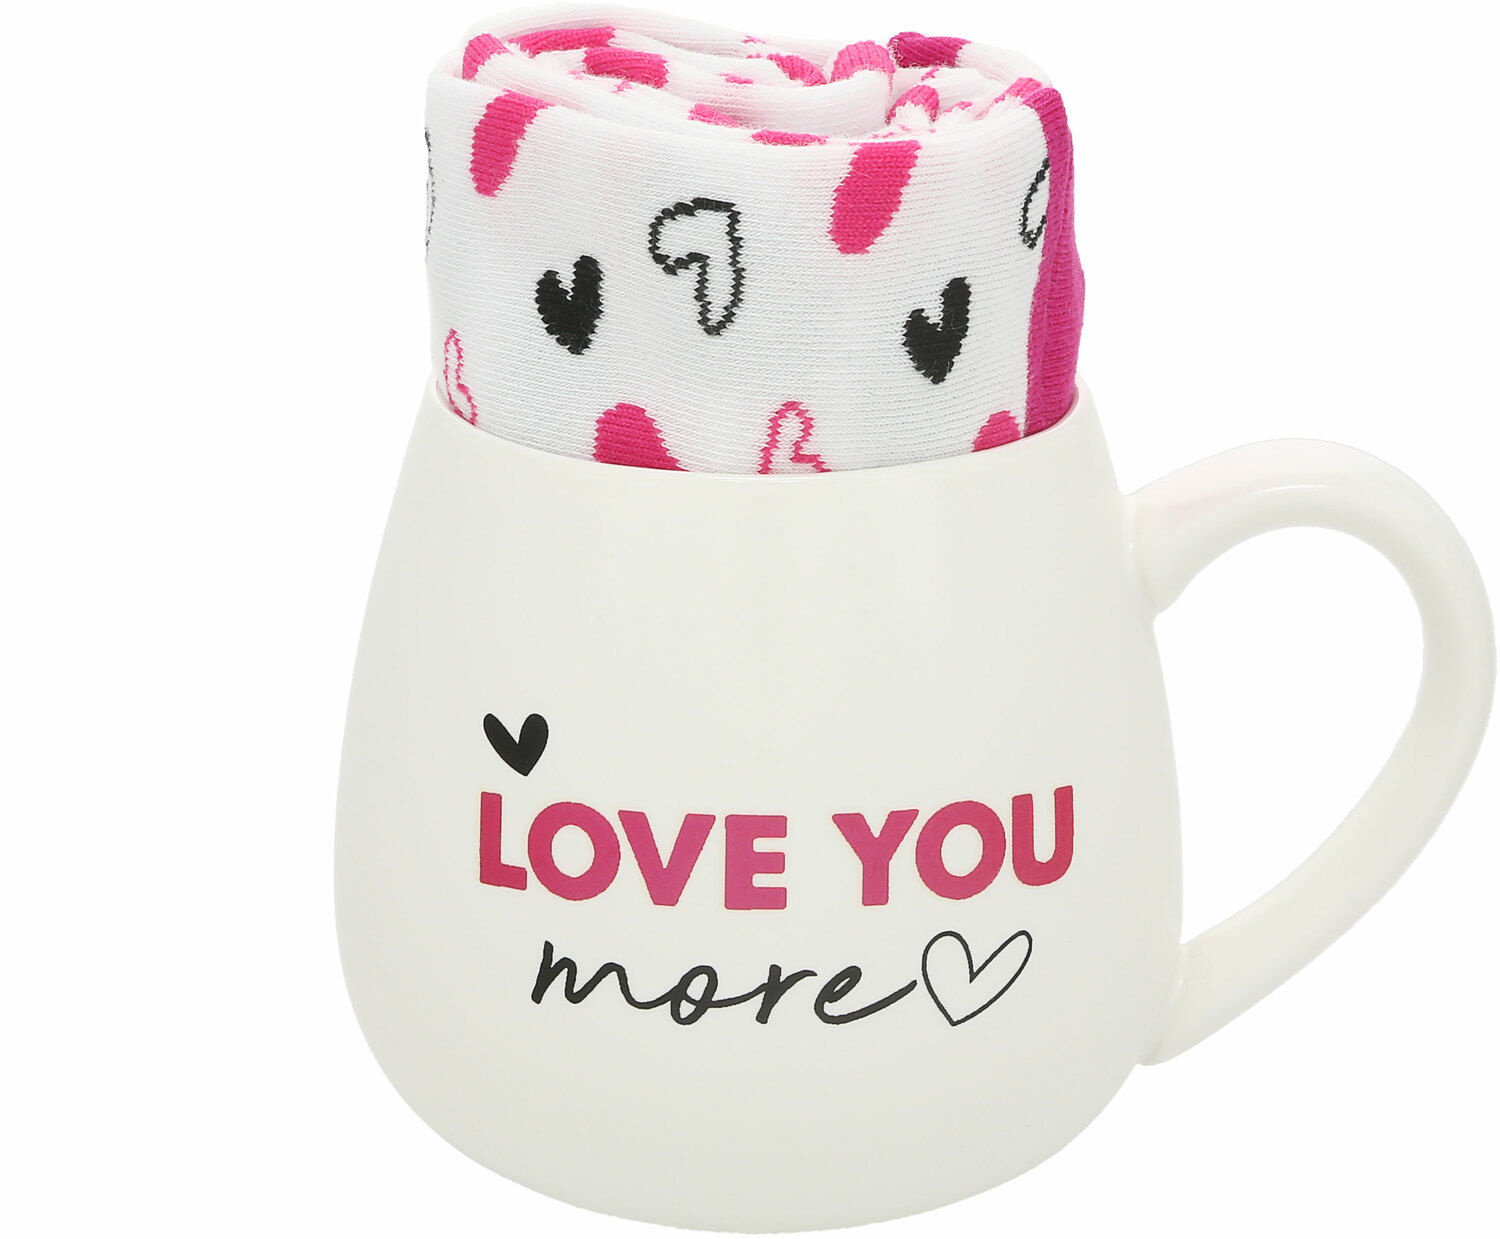 Love You More by Warm & Toe-sty - Love You More - 15.5 oz Mug and Sock Set